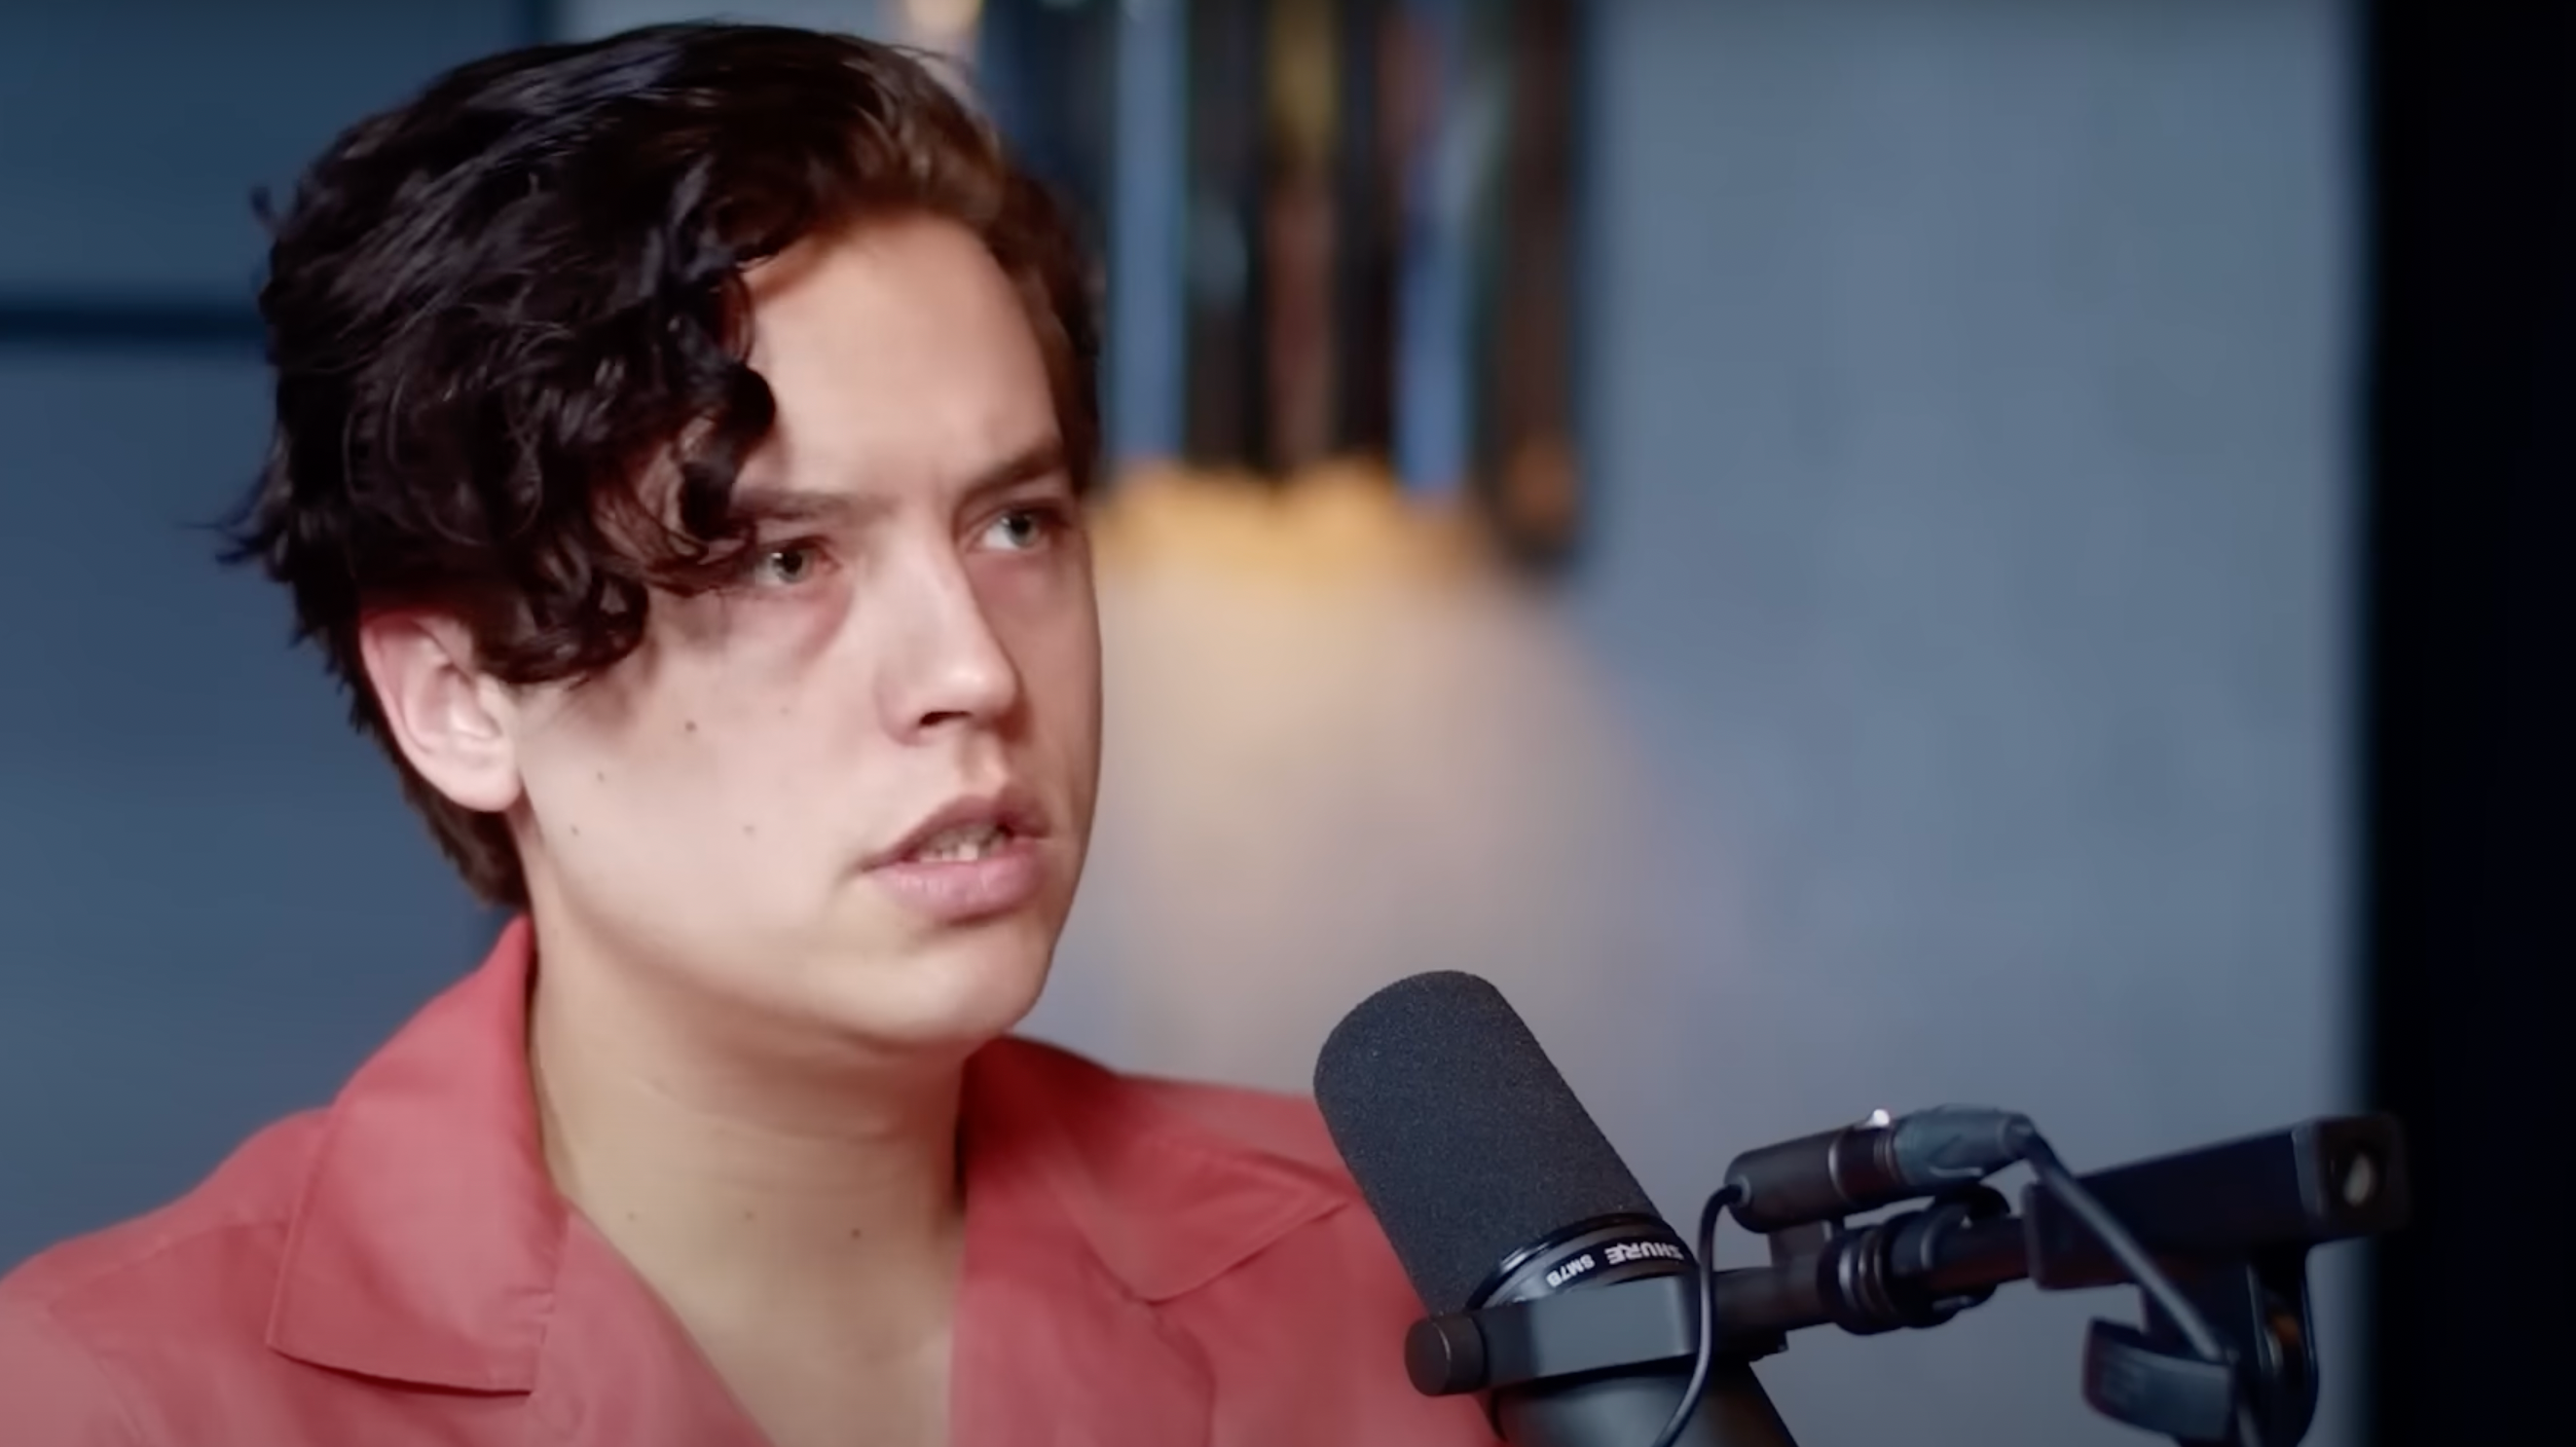 Cole Sprouse Claims Estranged Mother Grapples With 'Wicked Narcissism